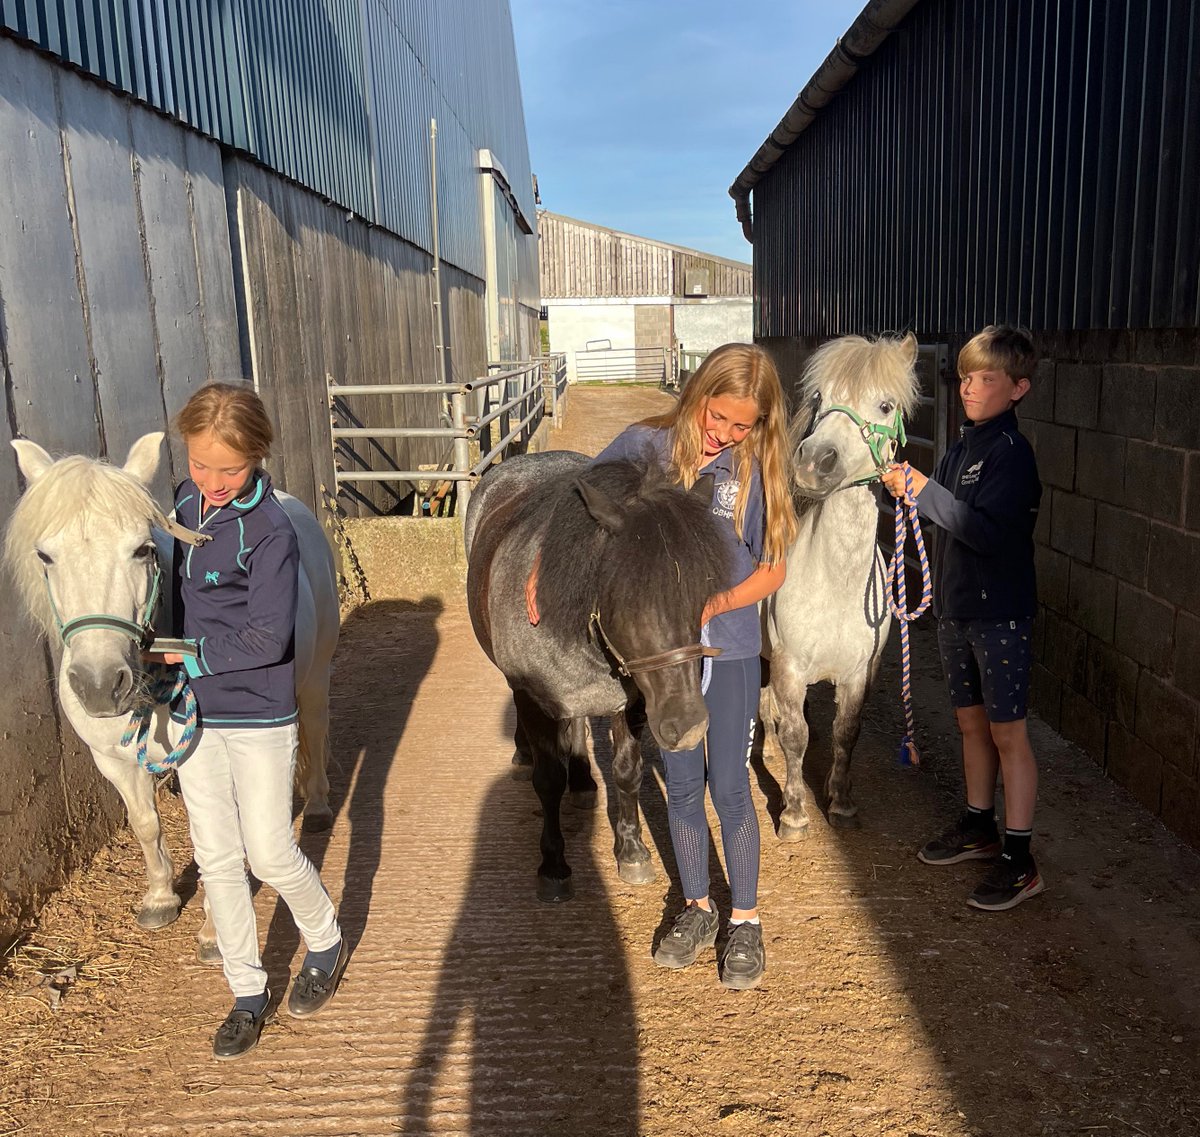 We had a lovely visit from some tiny guests this week! All set for the Shetland races at The Royal Cheshire Show #kelsallhillequestriancentre